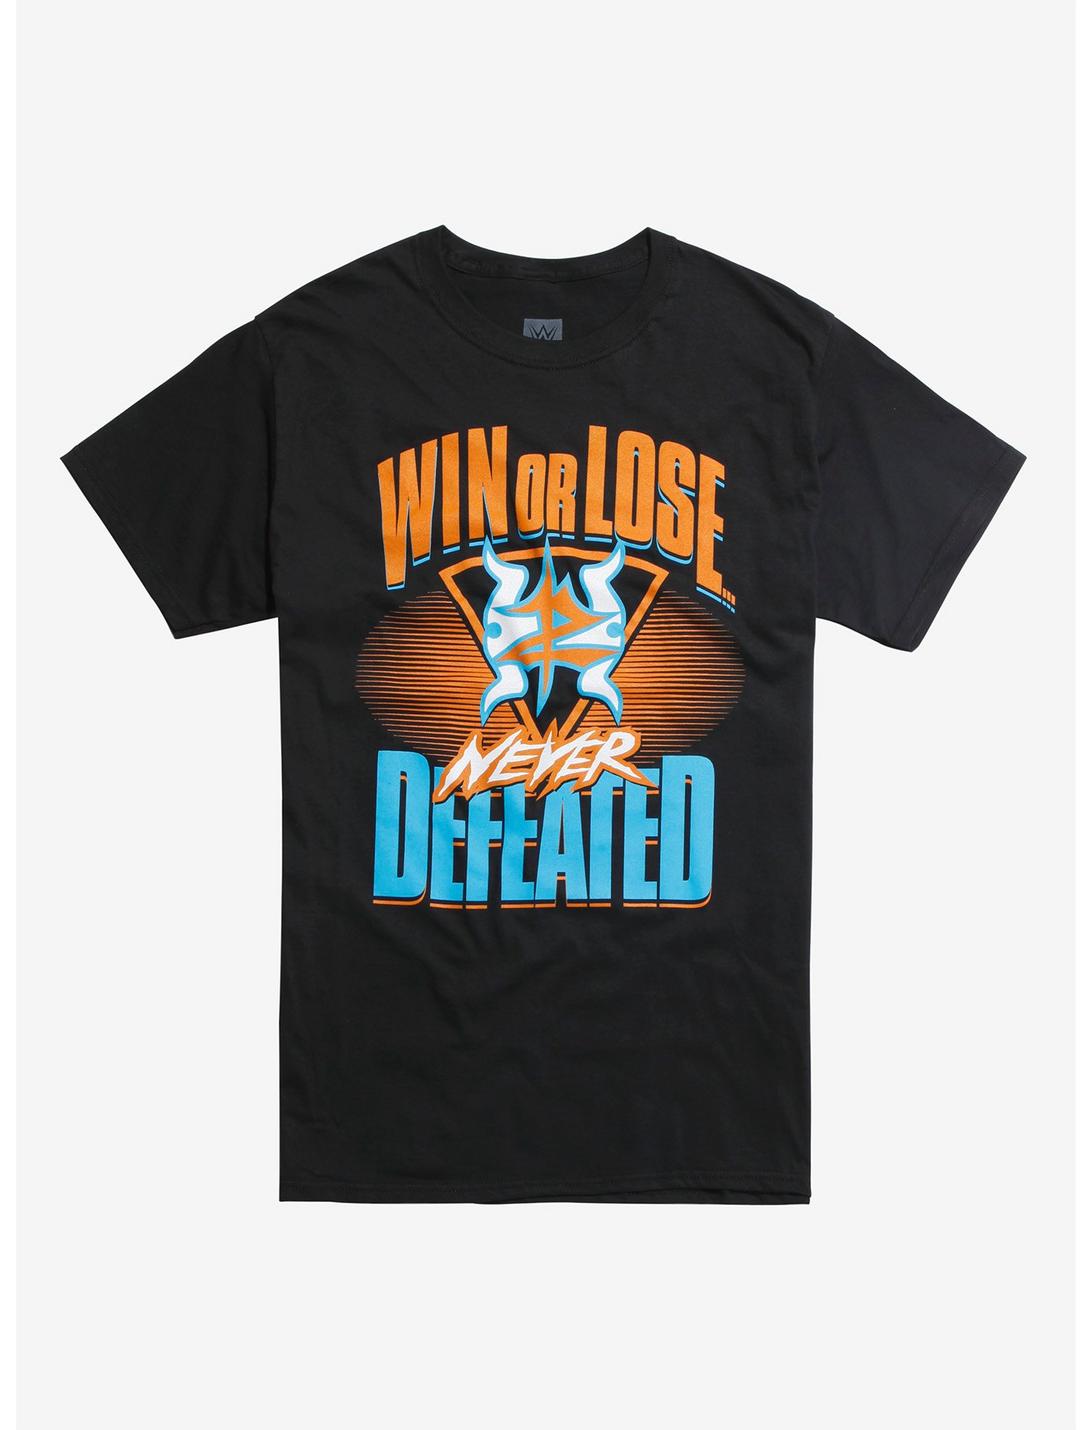 WWE Zack Ryder & Curt Hawkins Never Defeated T-Shirt, MULTI, hi-res